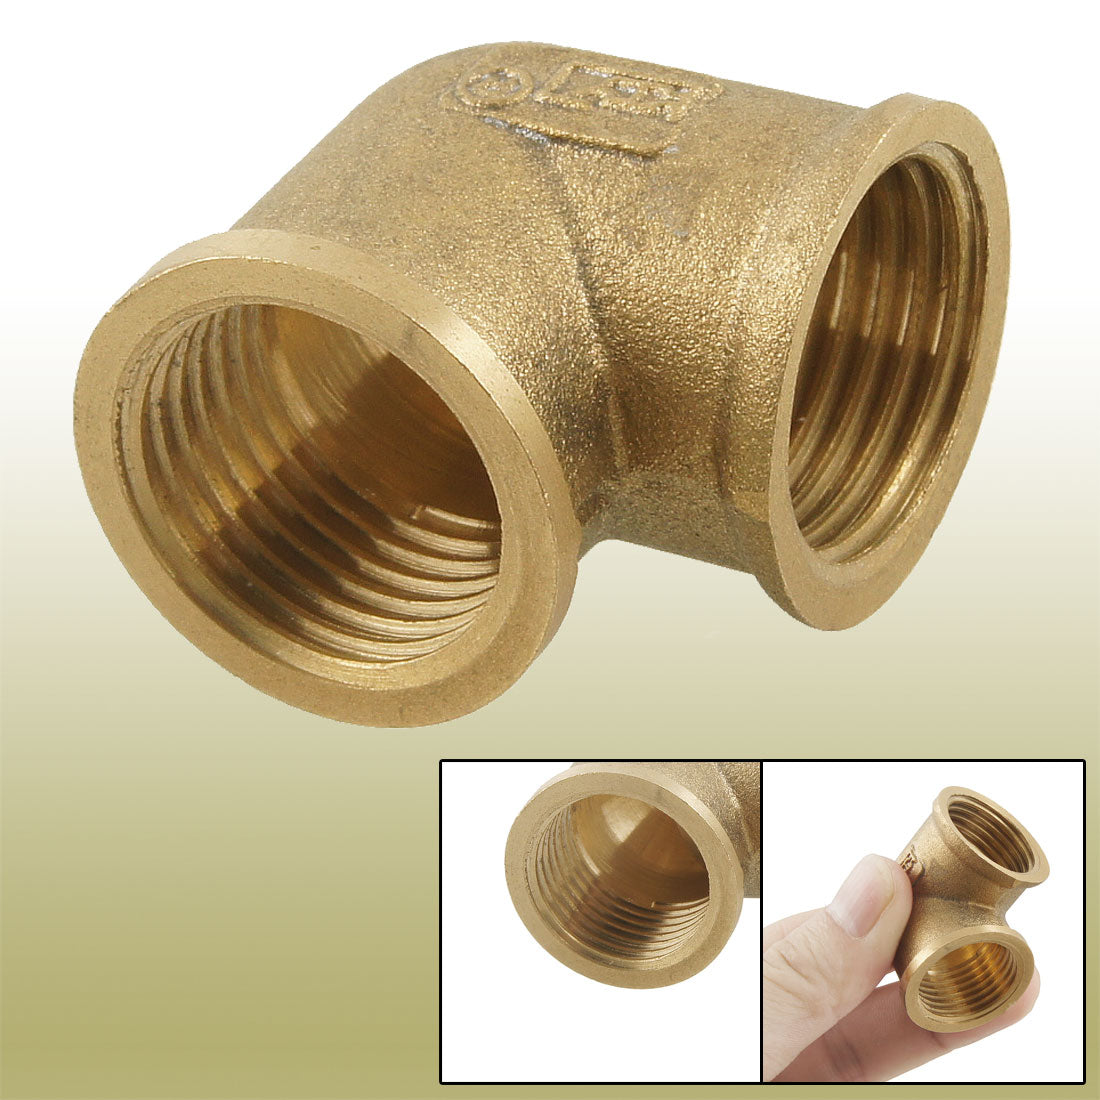 uxcell Uxcell G1/2 Female Threaded 90 Degree Elbow Fitting Union Adapter Brass Tone